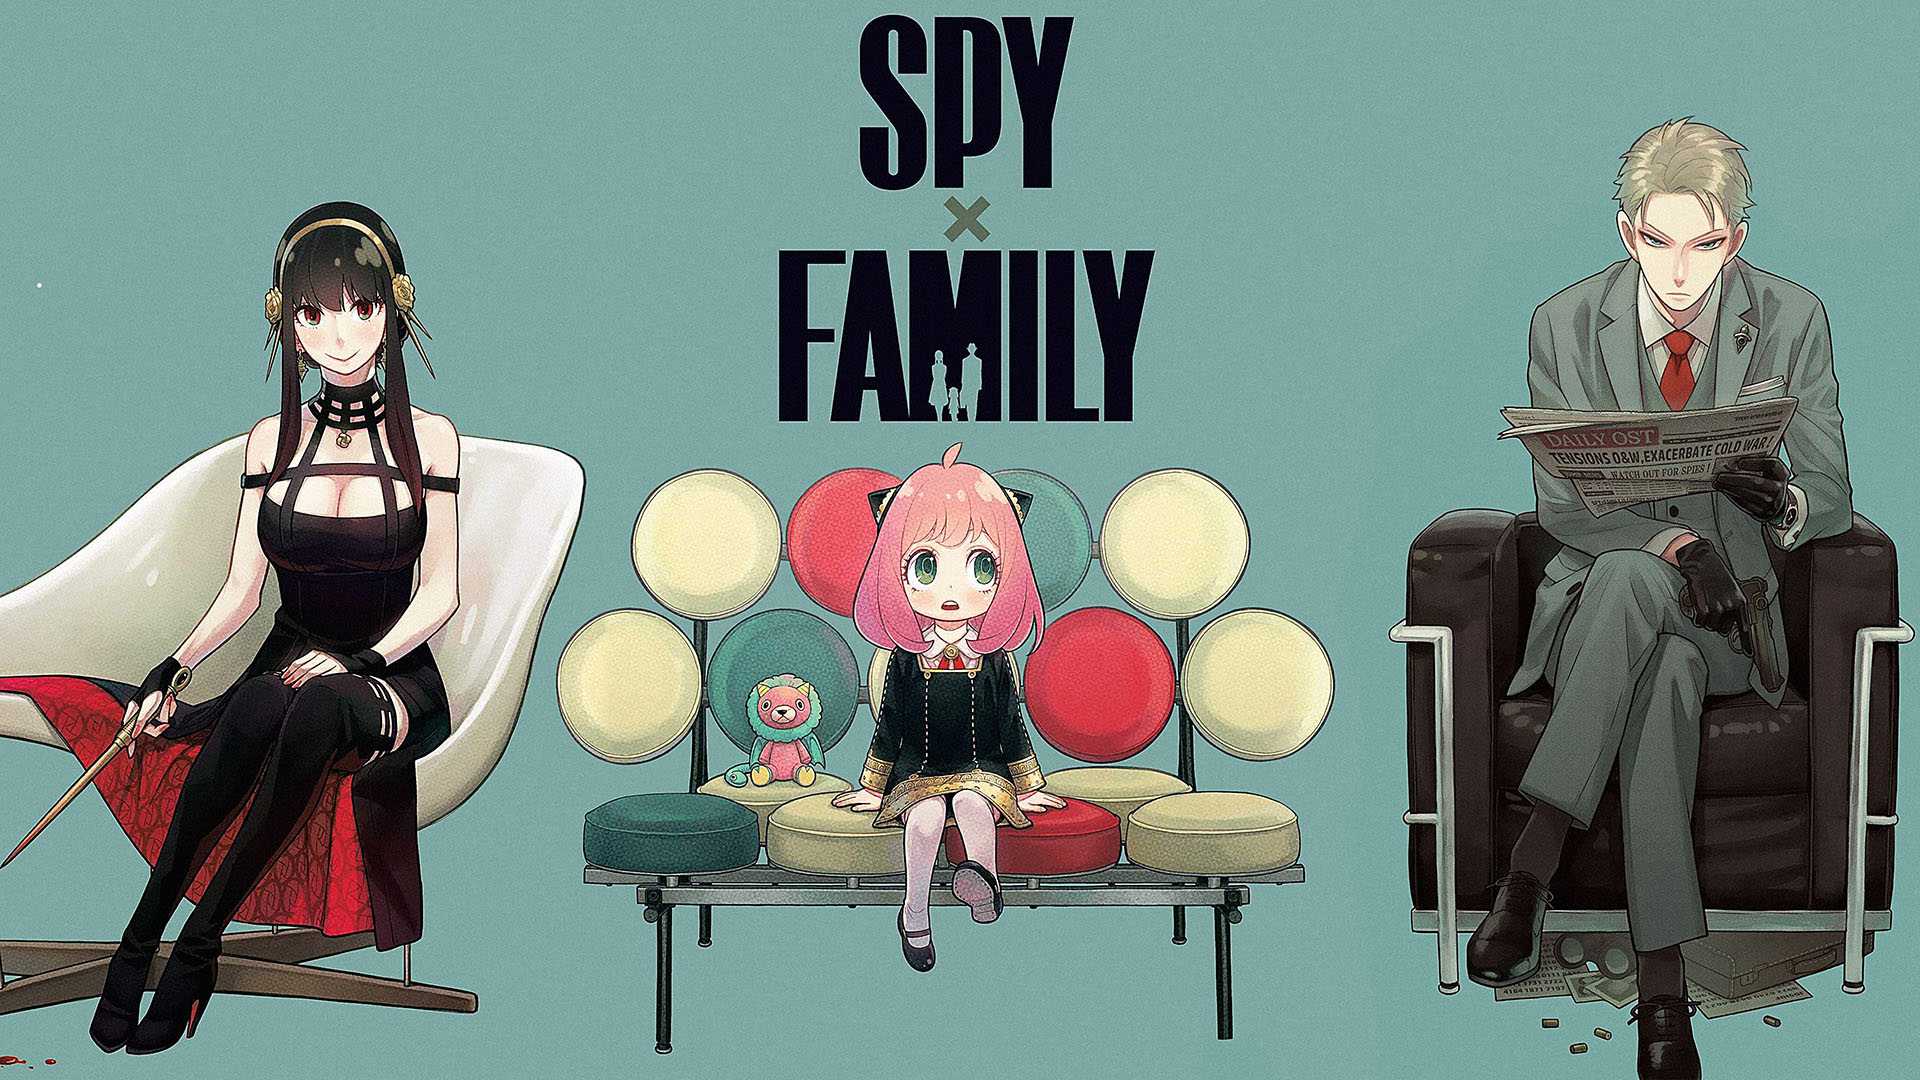 Spy X Family Anya Wallpapers - Wallpaper Cave